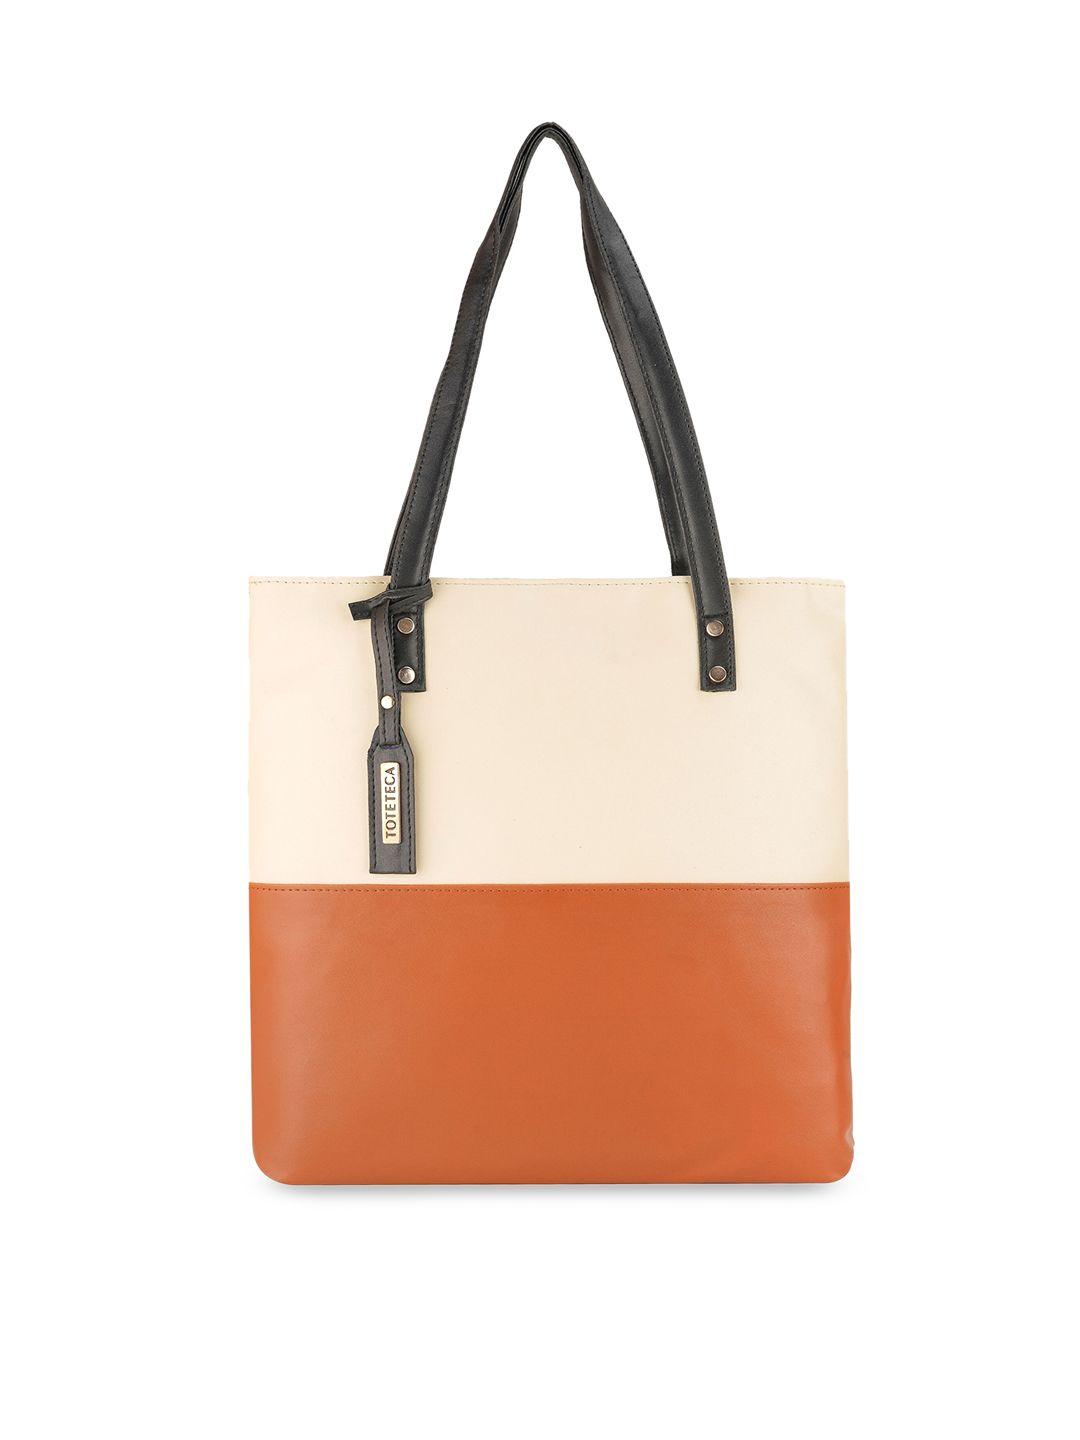 toteteca white colourblocked pu structured shoulder bag with tasselled